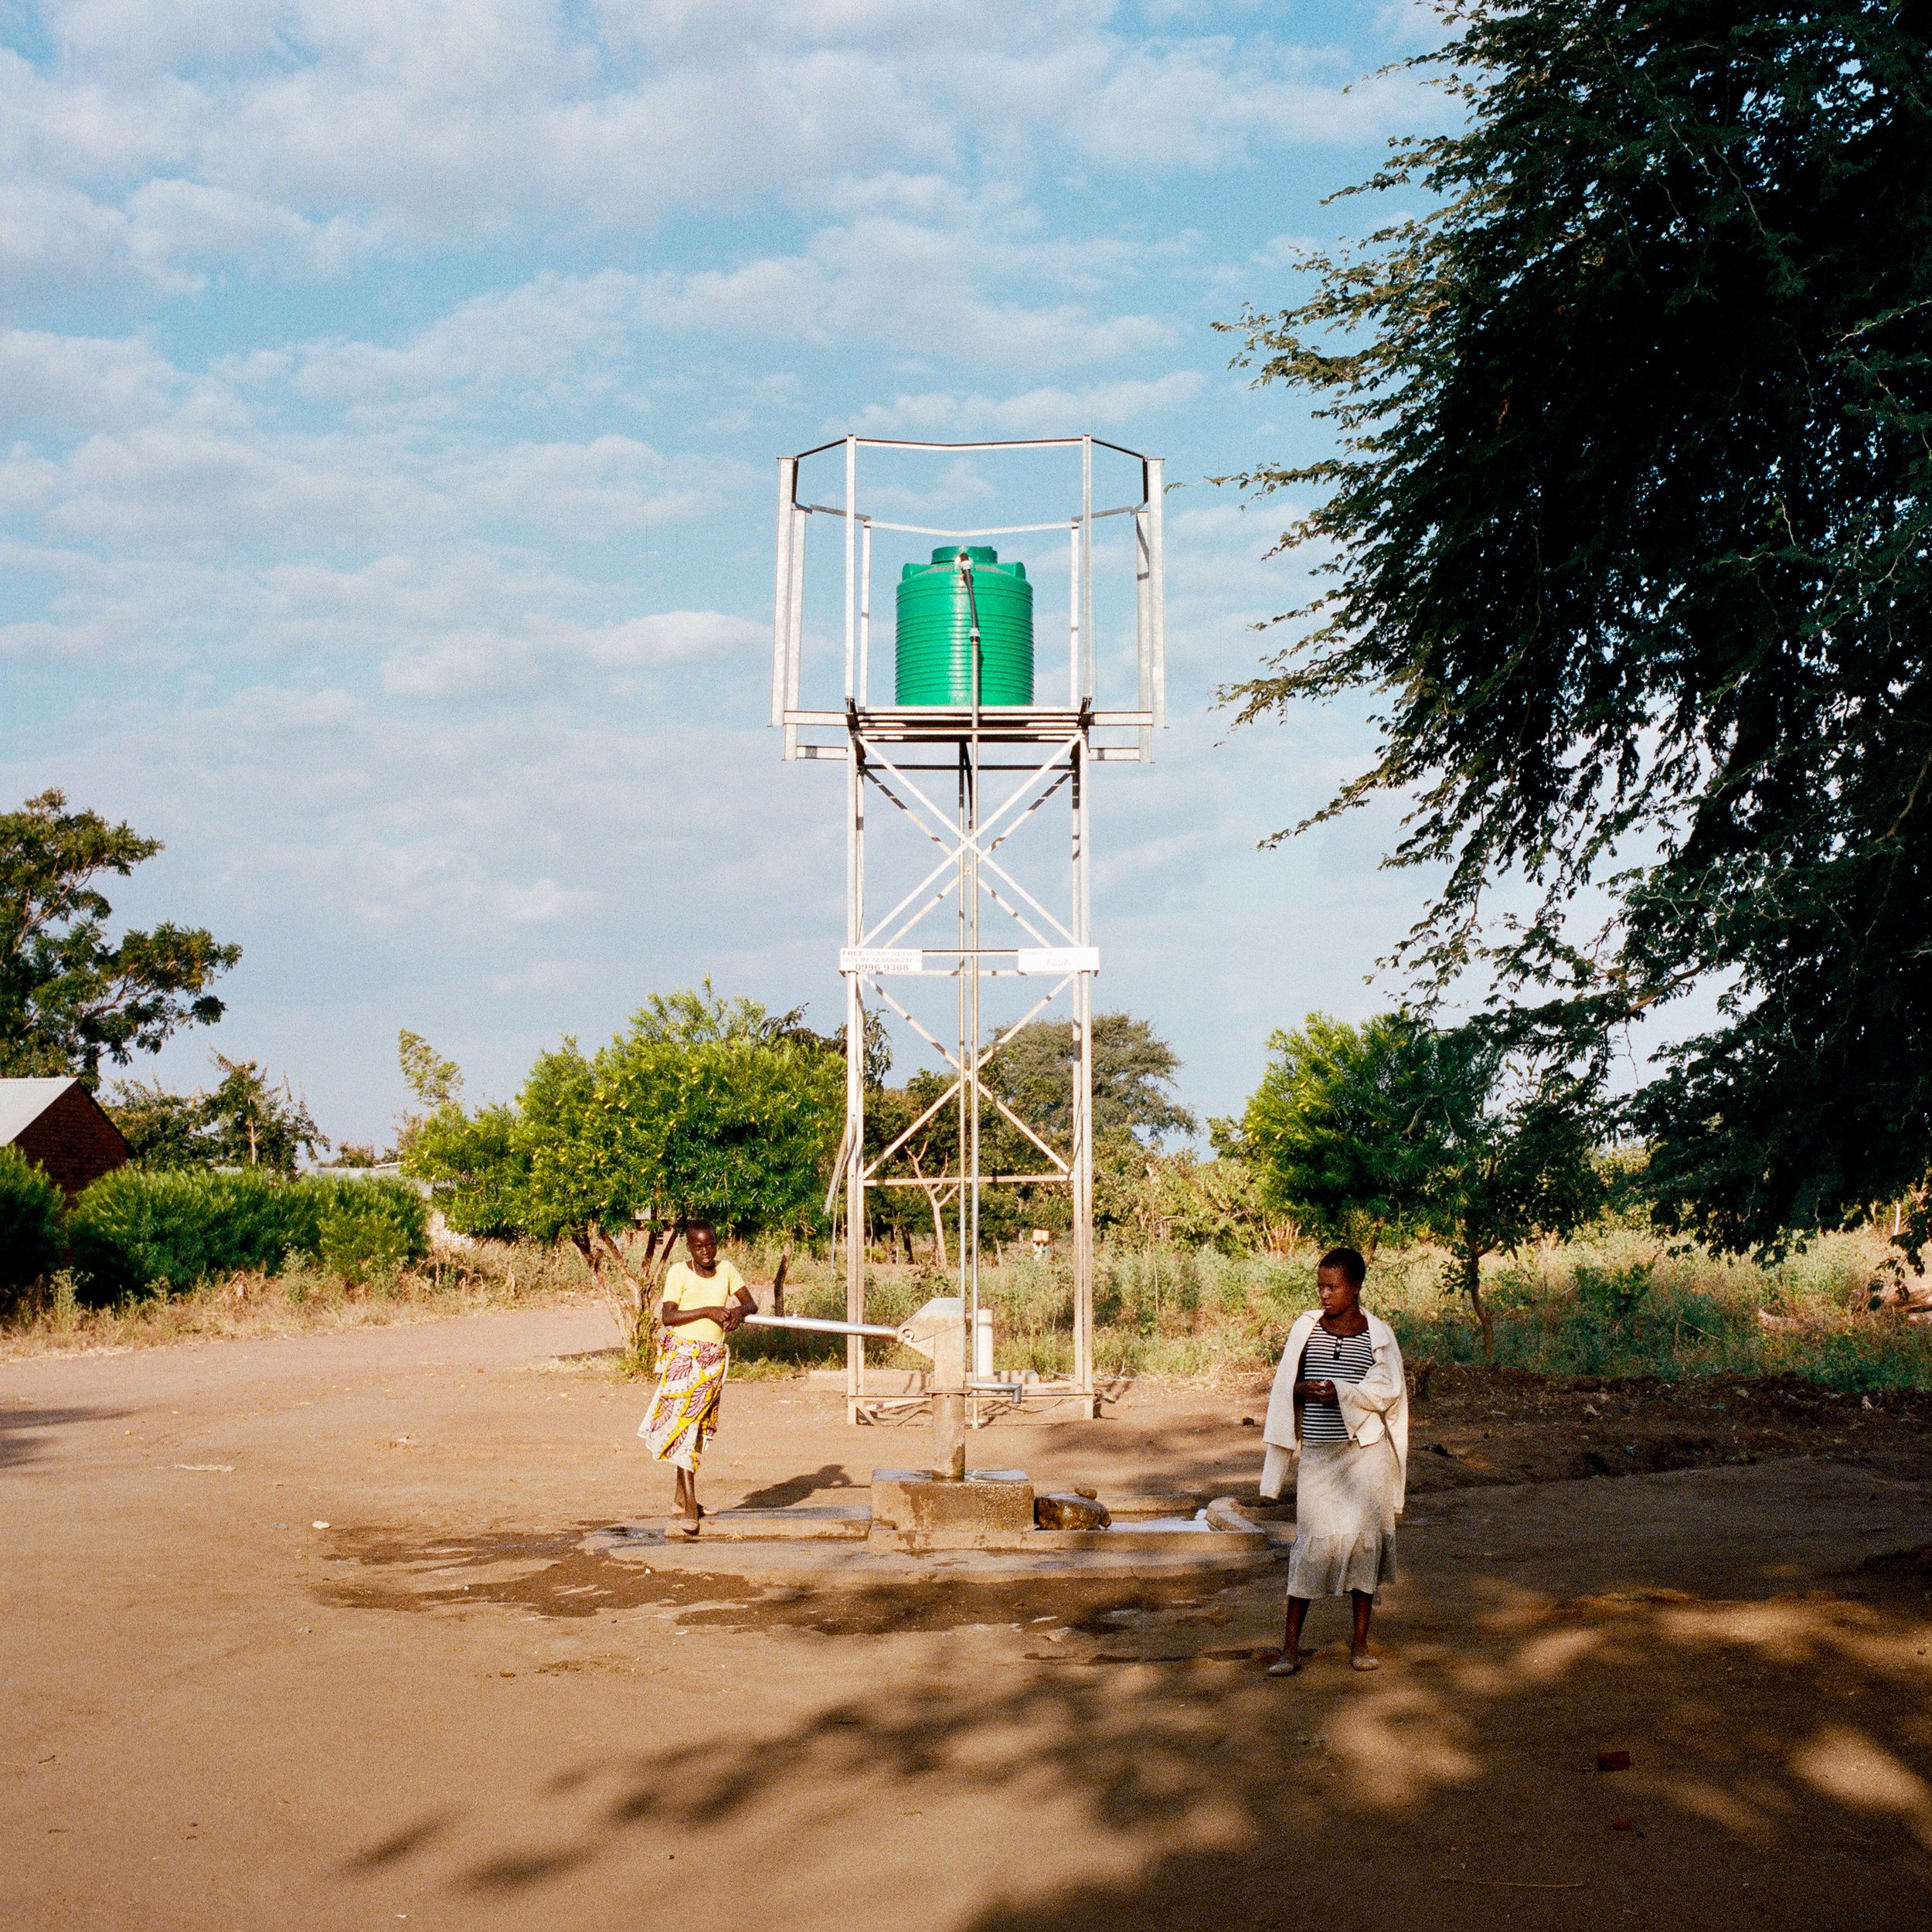  Empty, unused water tower from the site of a broken PlayPump. Nkakawu, Balaka District, Malawi. Photographed June 13, 2015. The people getting water underneath the tower are using a handpump that does not require use of the tower. 